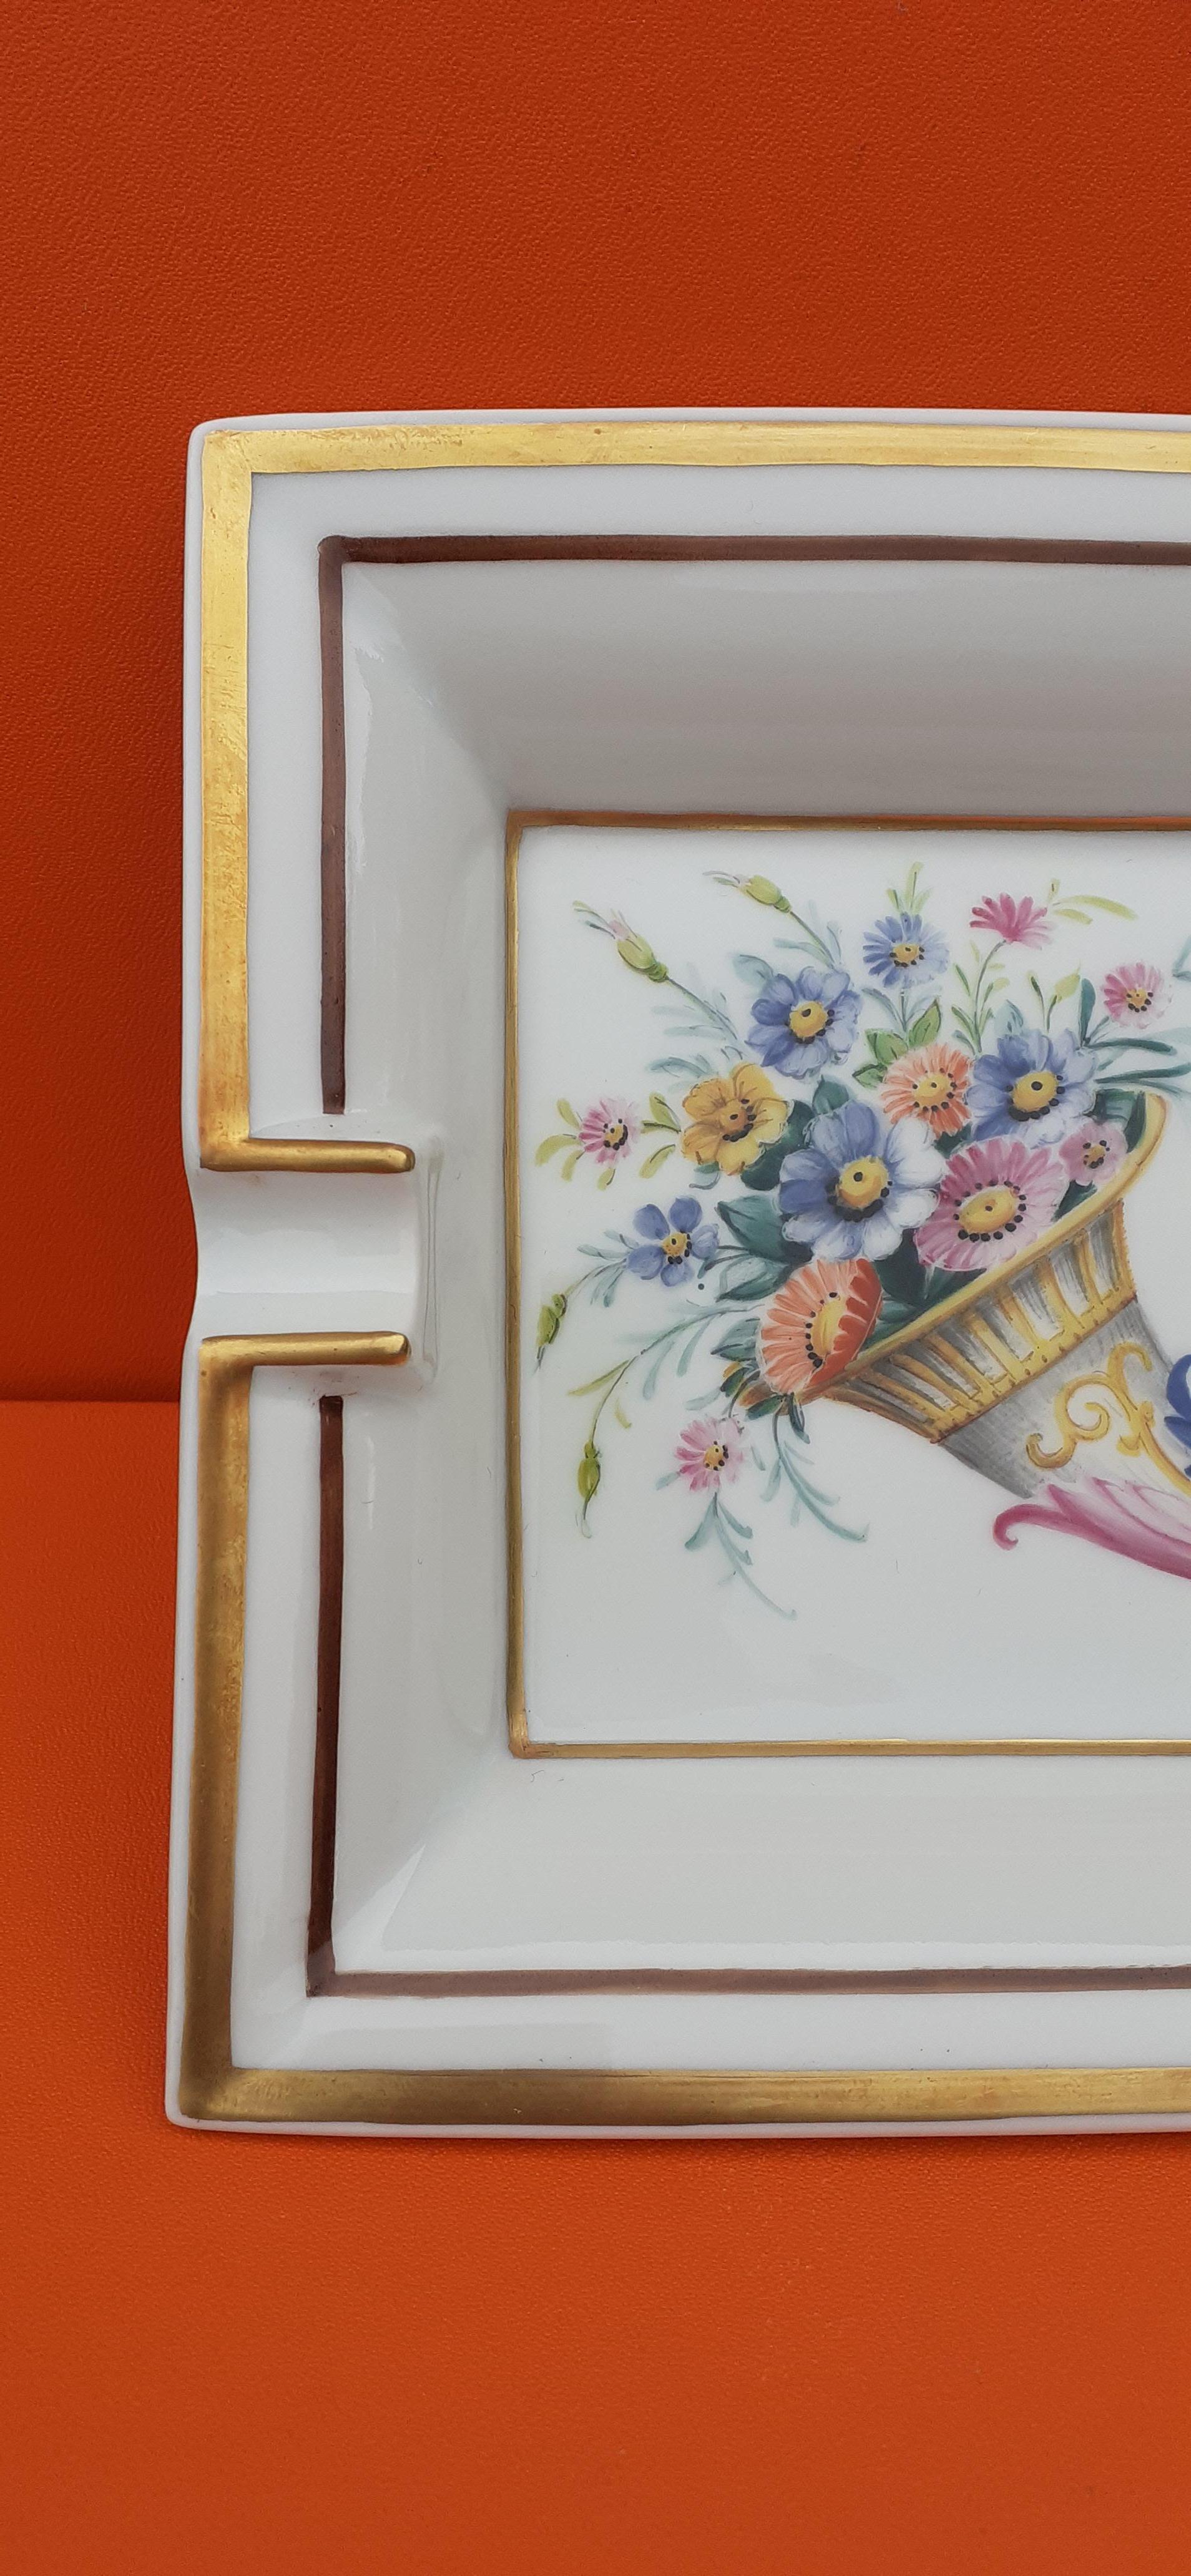 This is a rare opportunity to get this so beautiful authentic Hermès Ashtray

This is a vintage piece, a collector !

Print: Cornucopia, Flowers

Made in France

Made of Porcelain

Colorways: White, Pink, Blue, Yellow, Green, Golden

